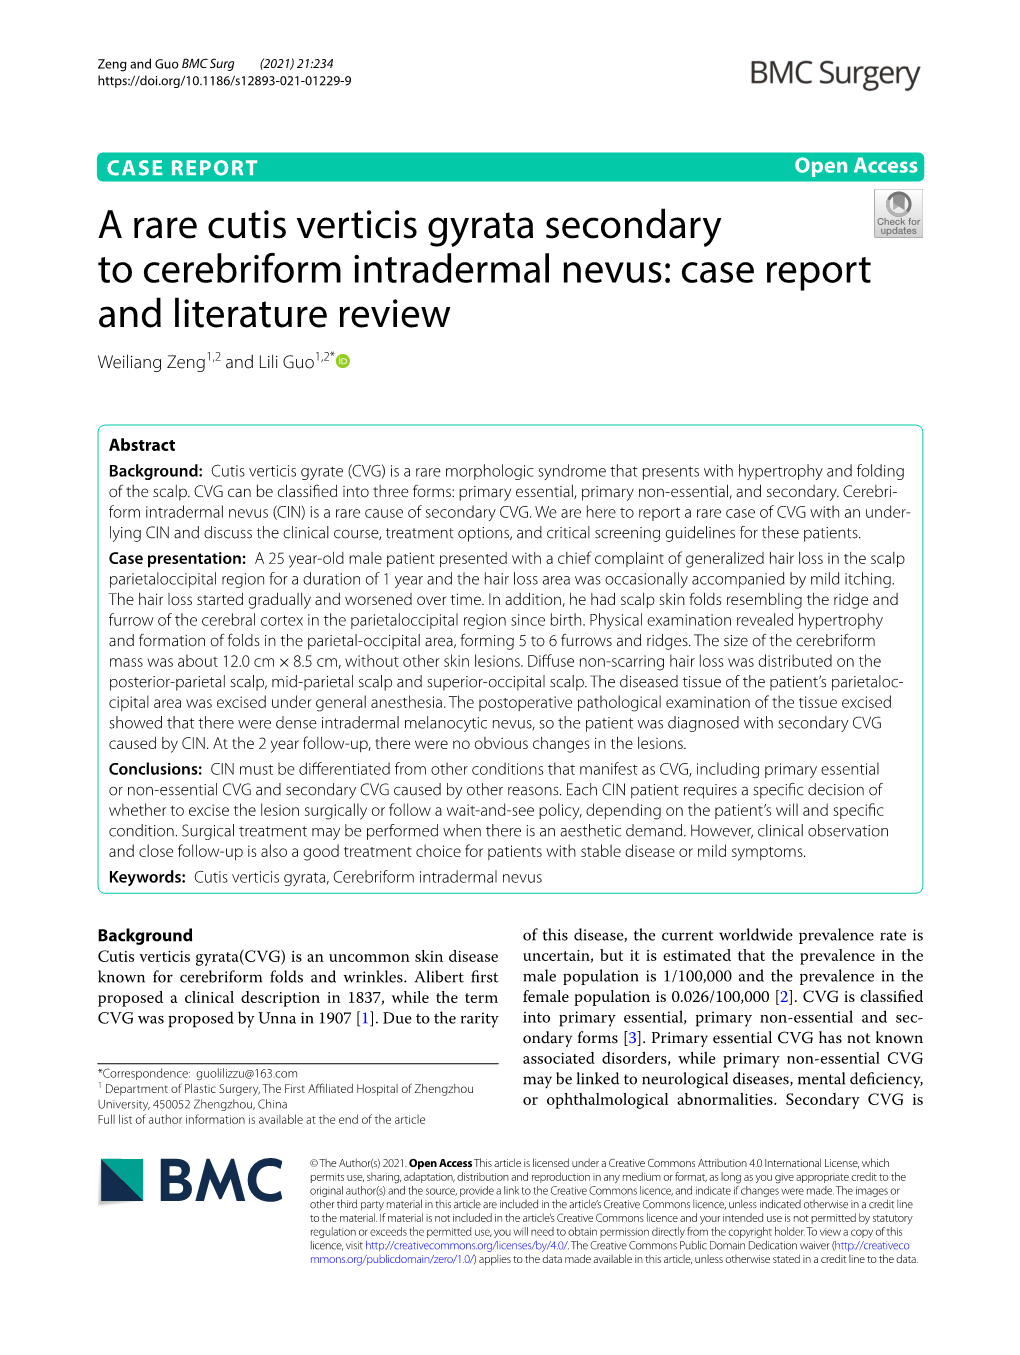 A Rare Cutis Verticis Gyrata Secondary to Cerebriform Intradermal Nevus: Case Report and Literature Review Weiliang Zeng1,2 and Lili Guo1,2*